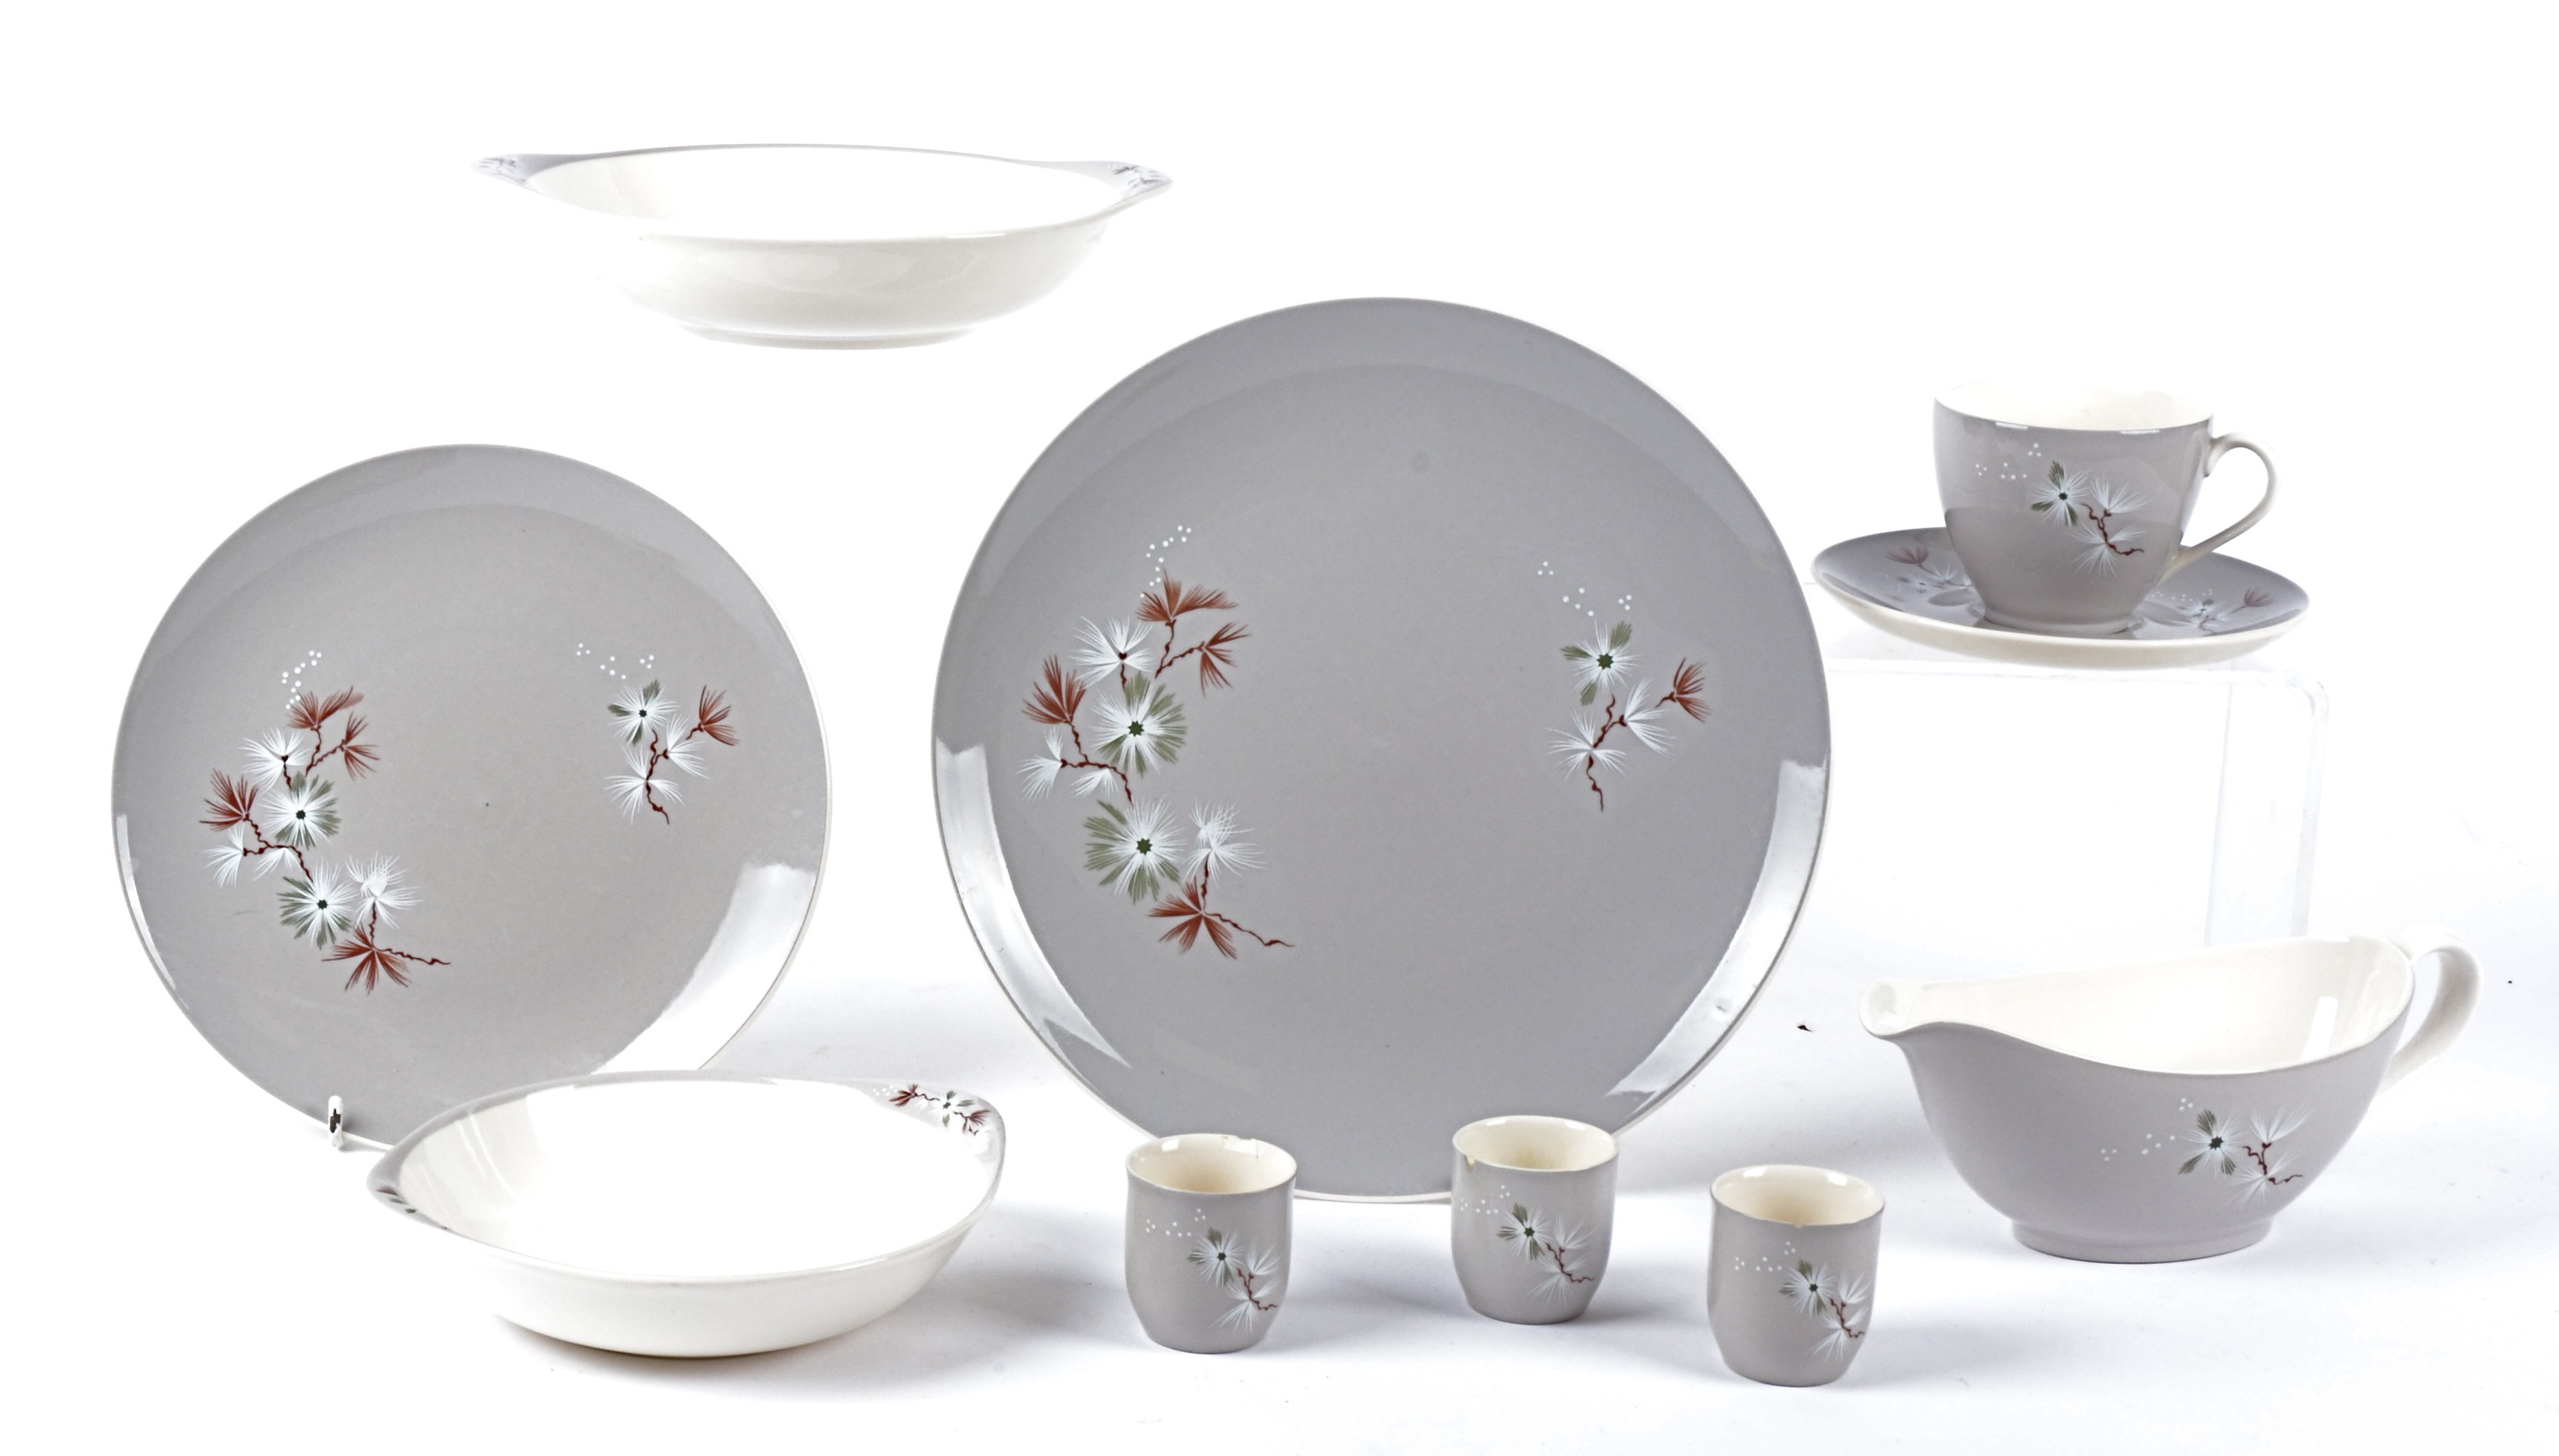 An extensive Royal Doulton 'Frost Pine dinner service' with stylised Winter plant life design, to - Image 3 of 3